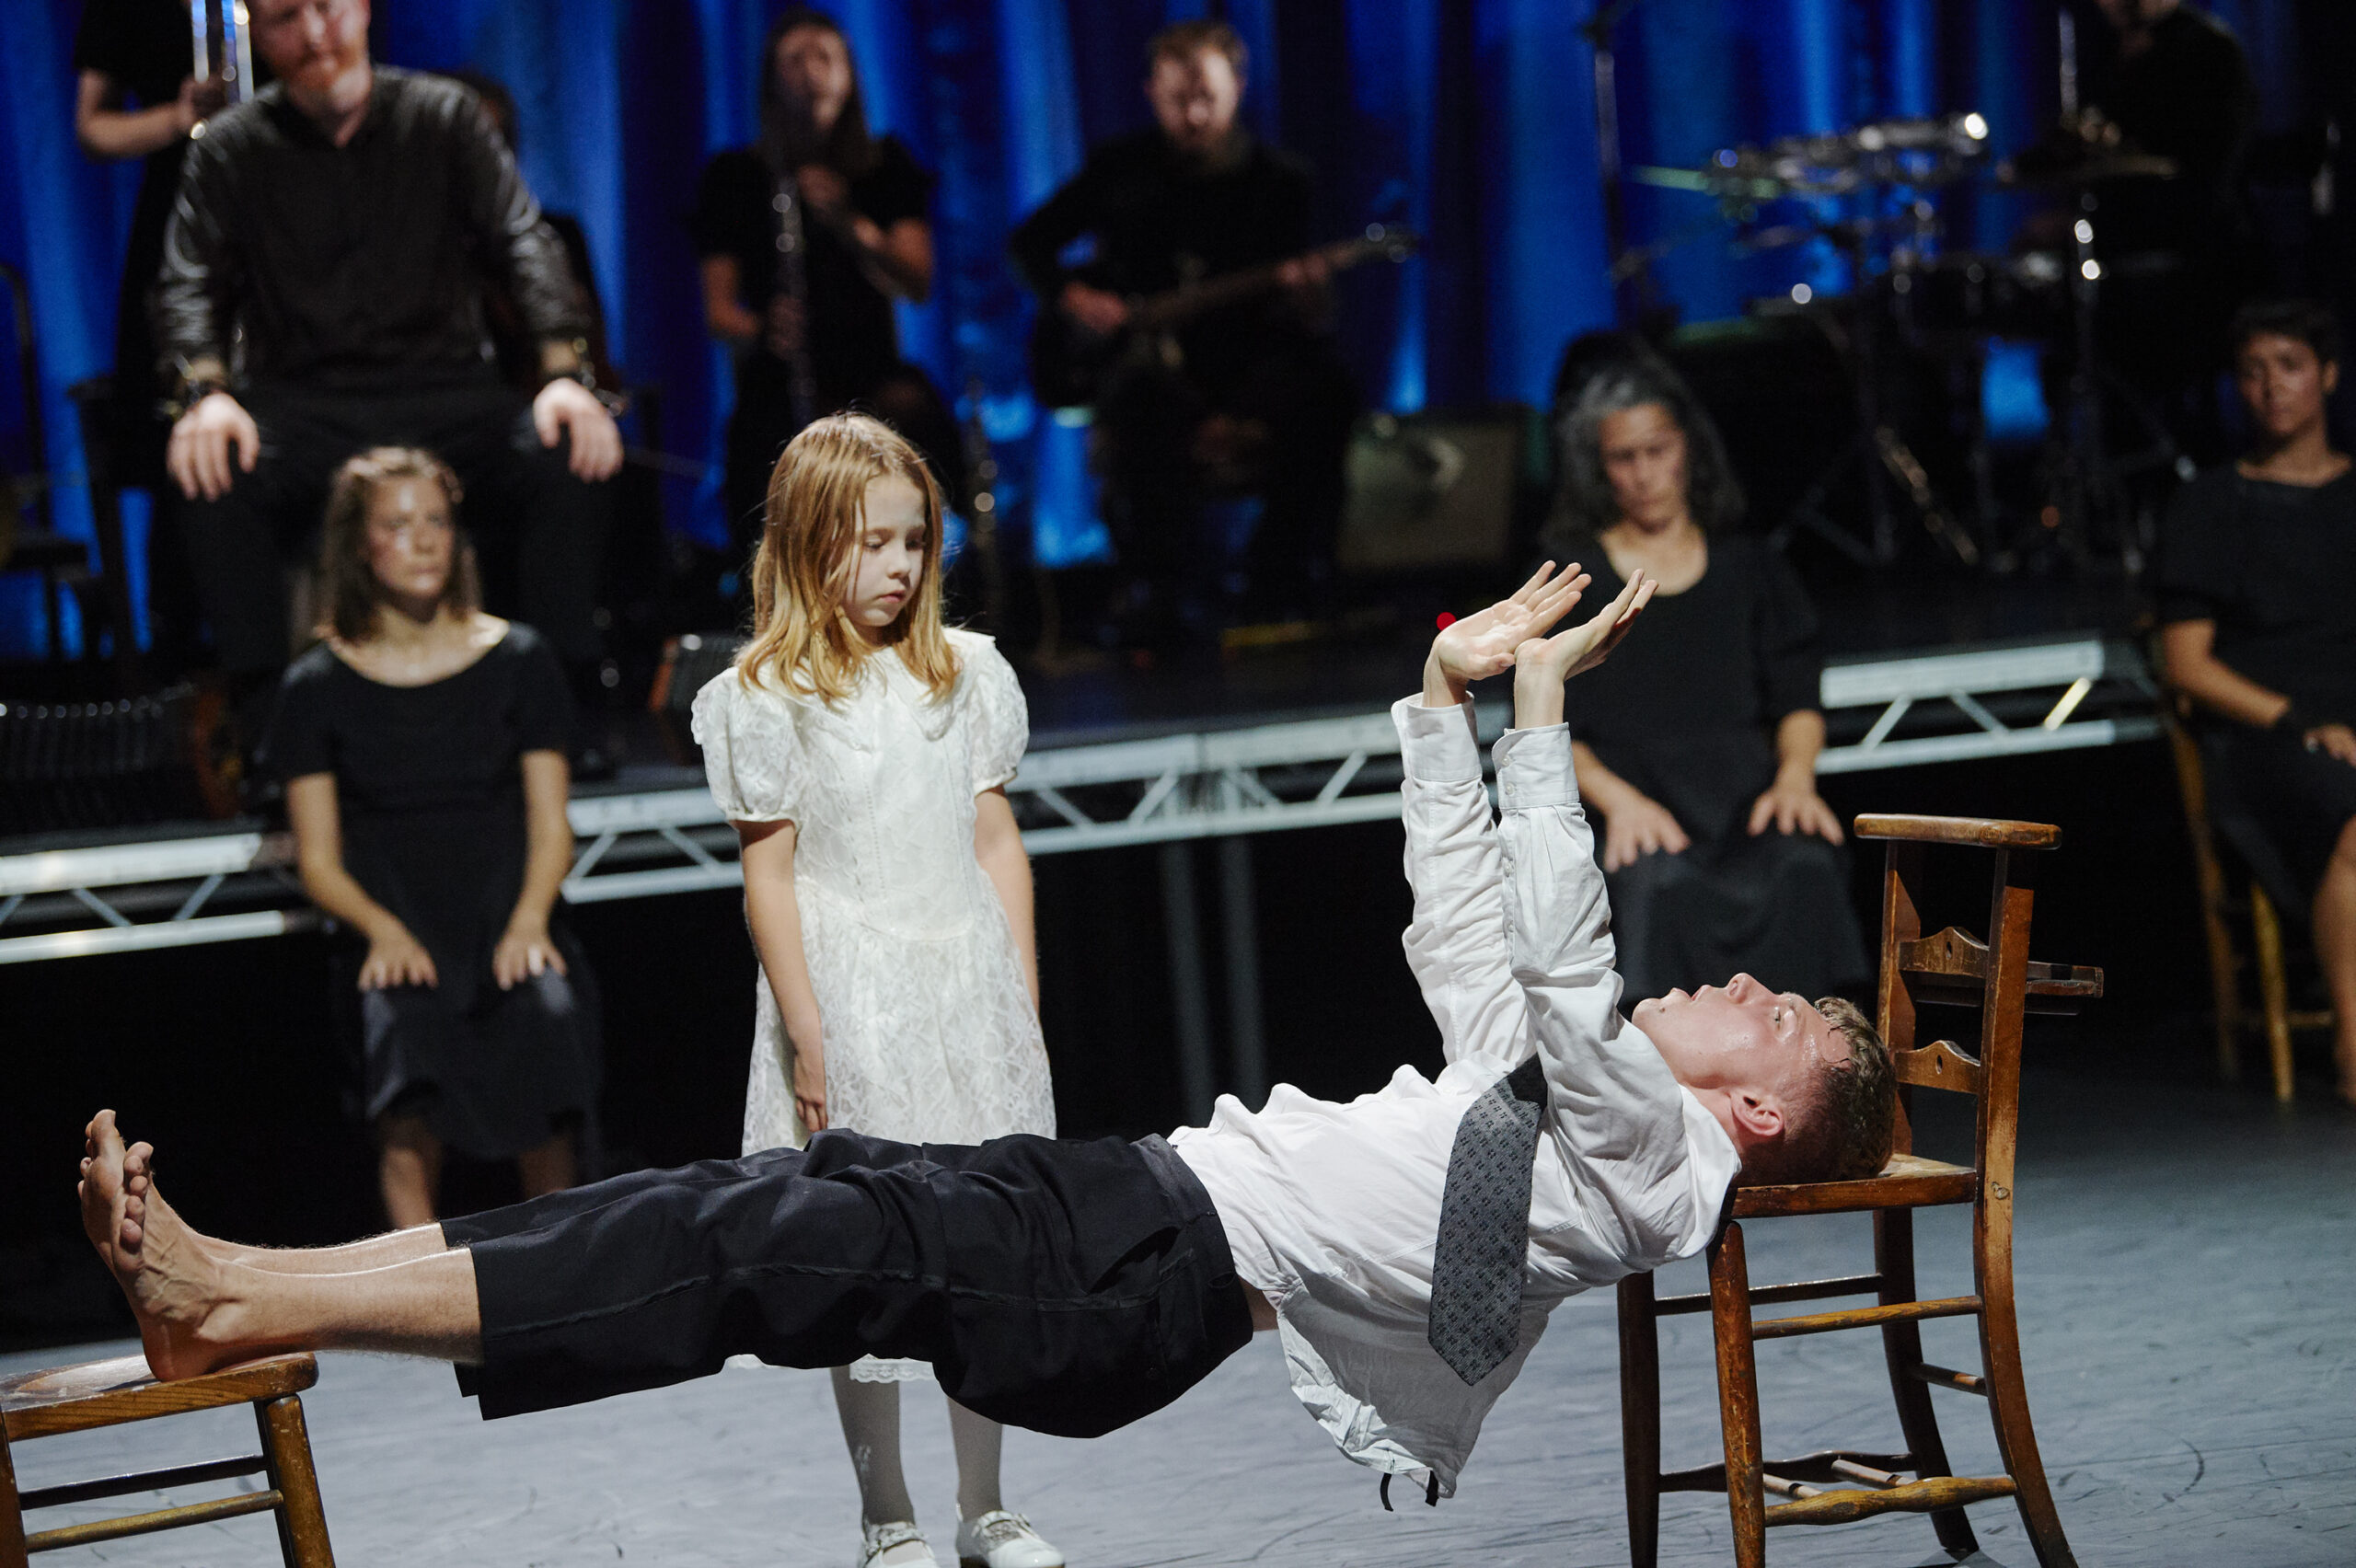 A blonde child in a white dress watches as a male dancer is suspended horizontally between two chairs. He rests his heels on the seat of one and his head on the other, holding his body horizontal to the floor as his palms press into the air above his shoulders. Performers in black sit upstage; others with instruments are on a raised platform behind.